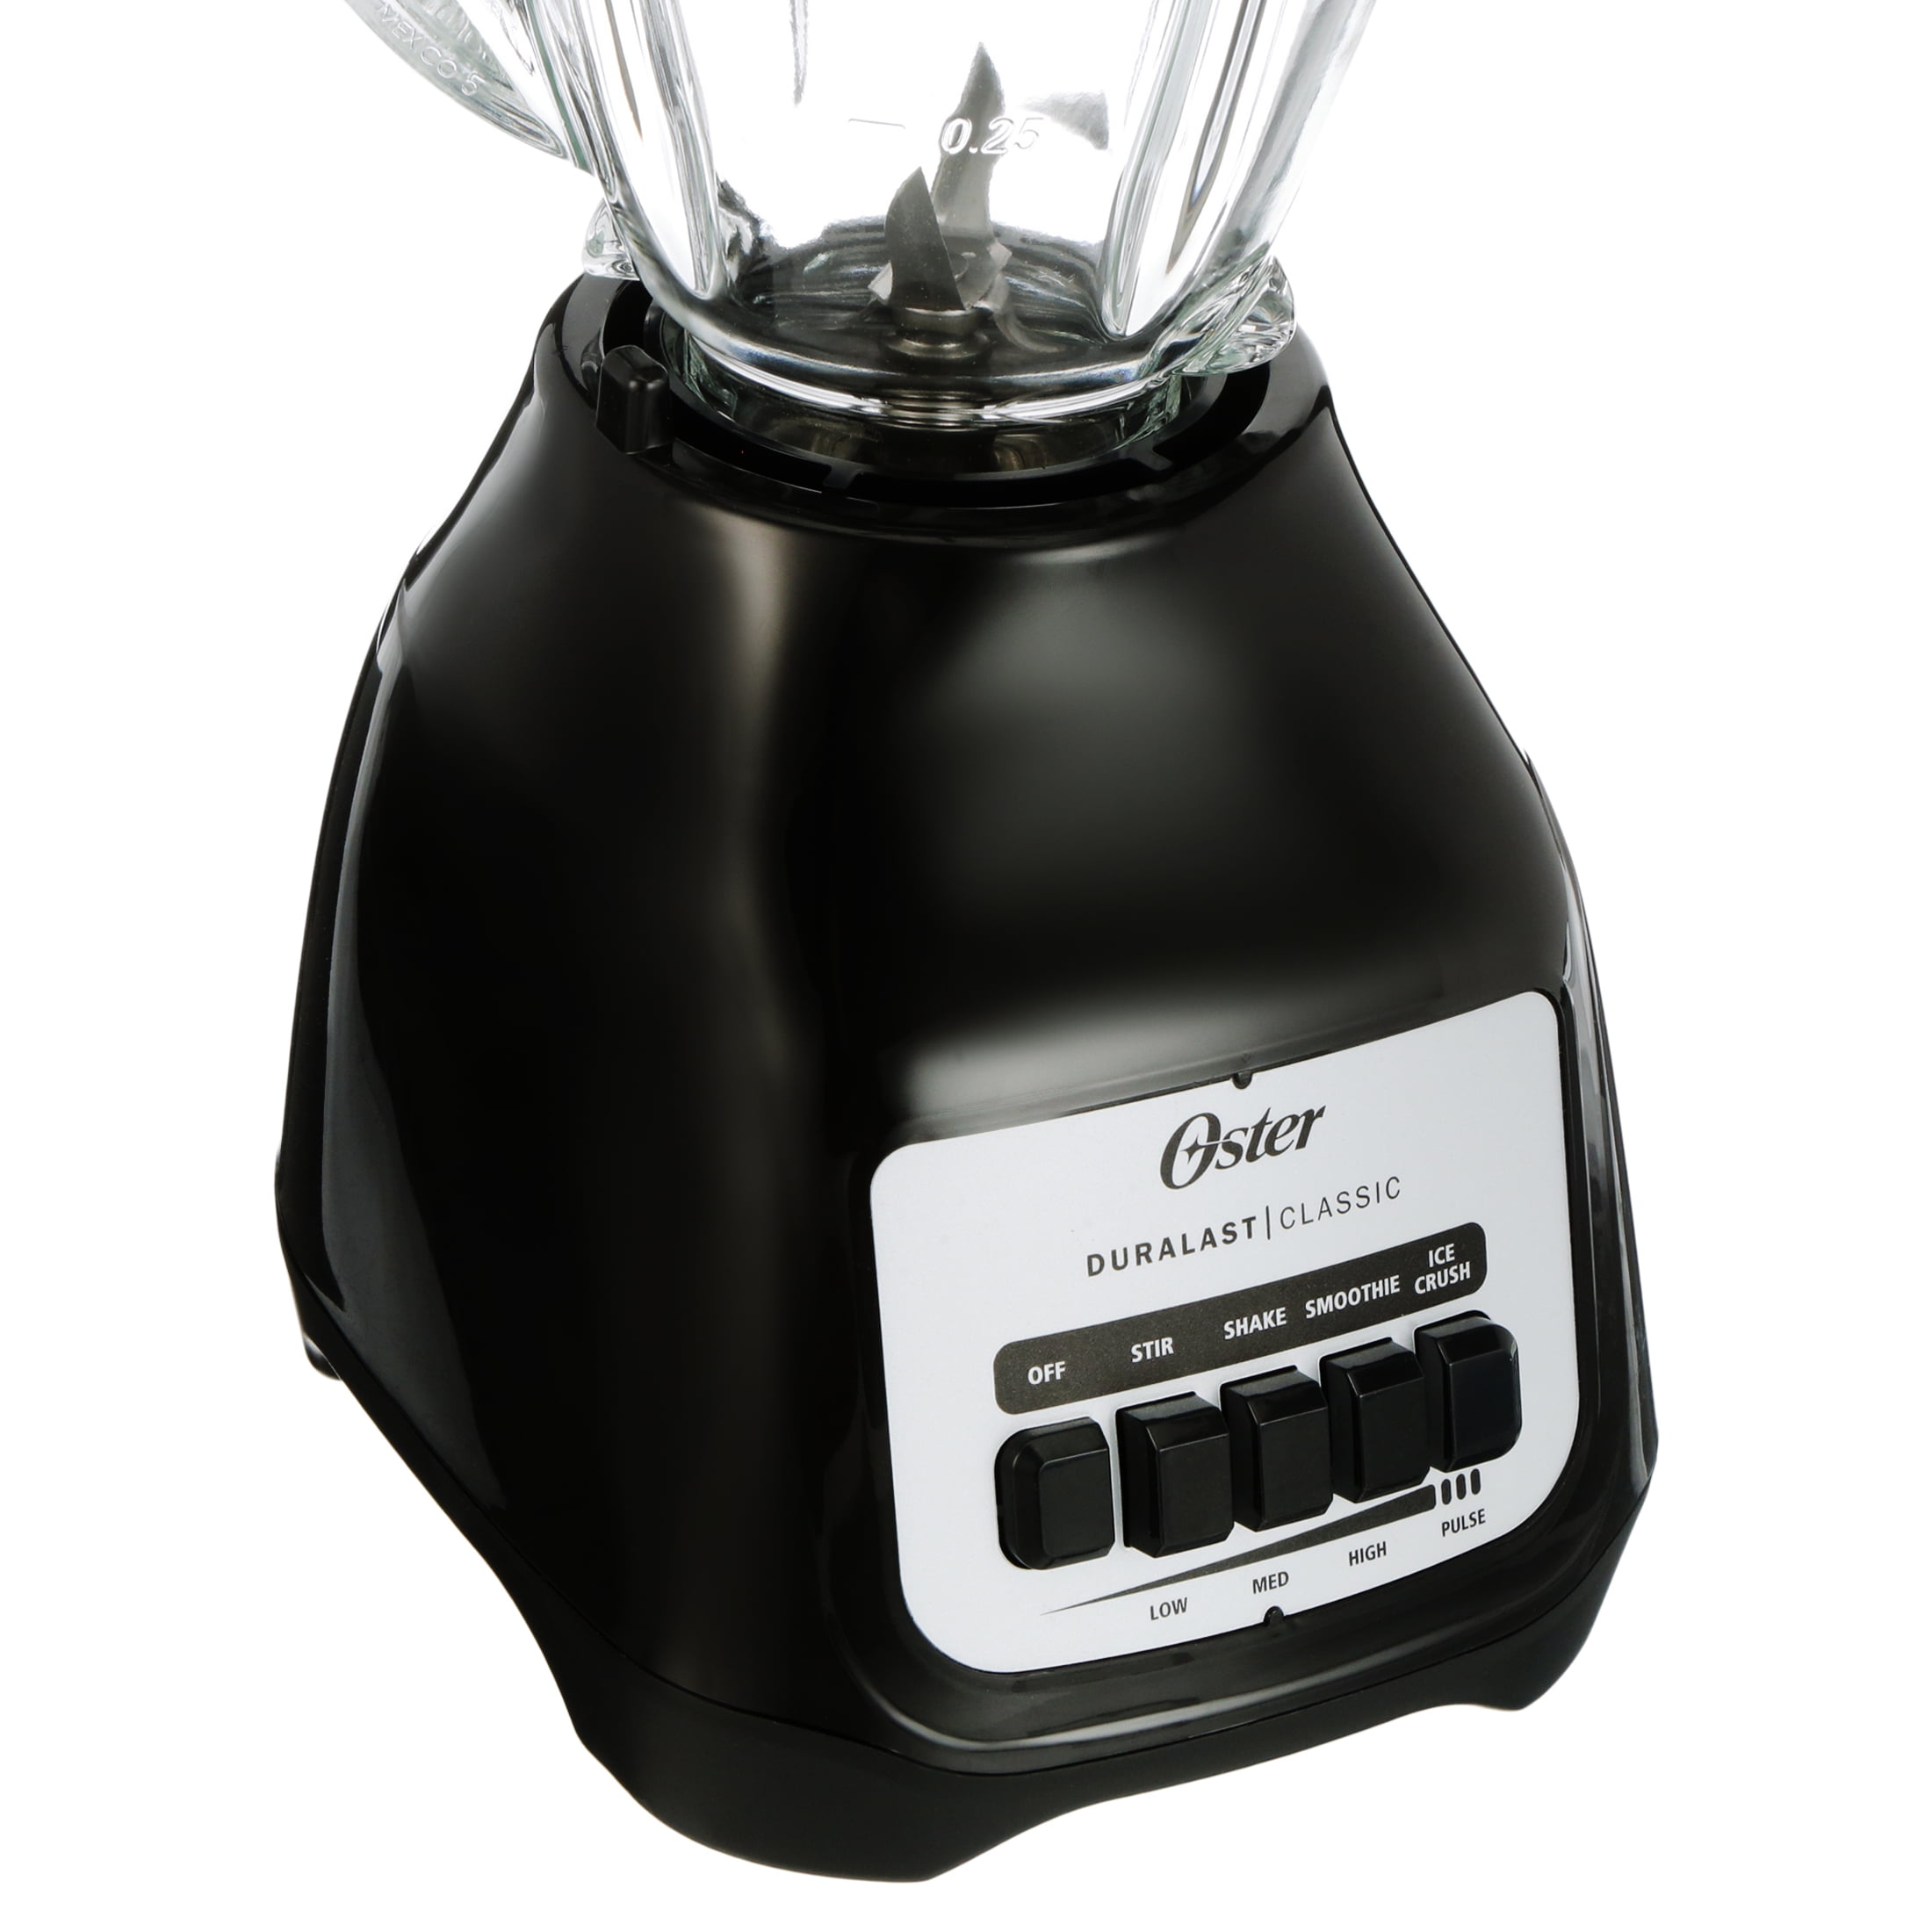 Oster® Classic Series 16 Speed Blender with 5-Cup Glass Jar, Brushed Nickel